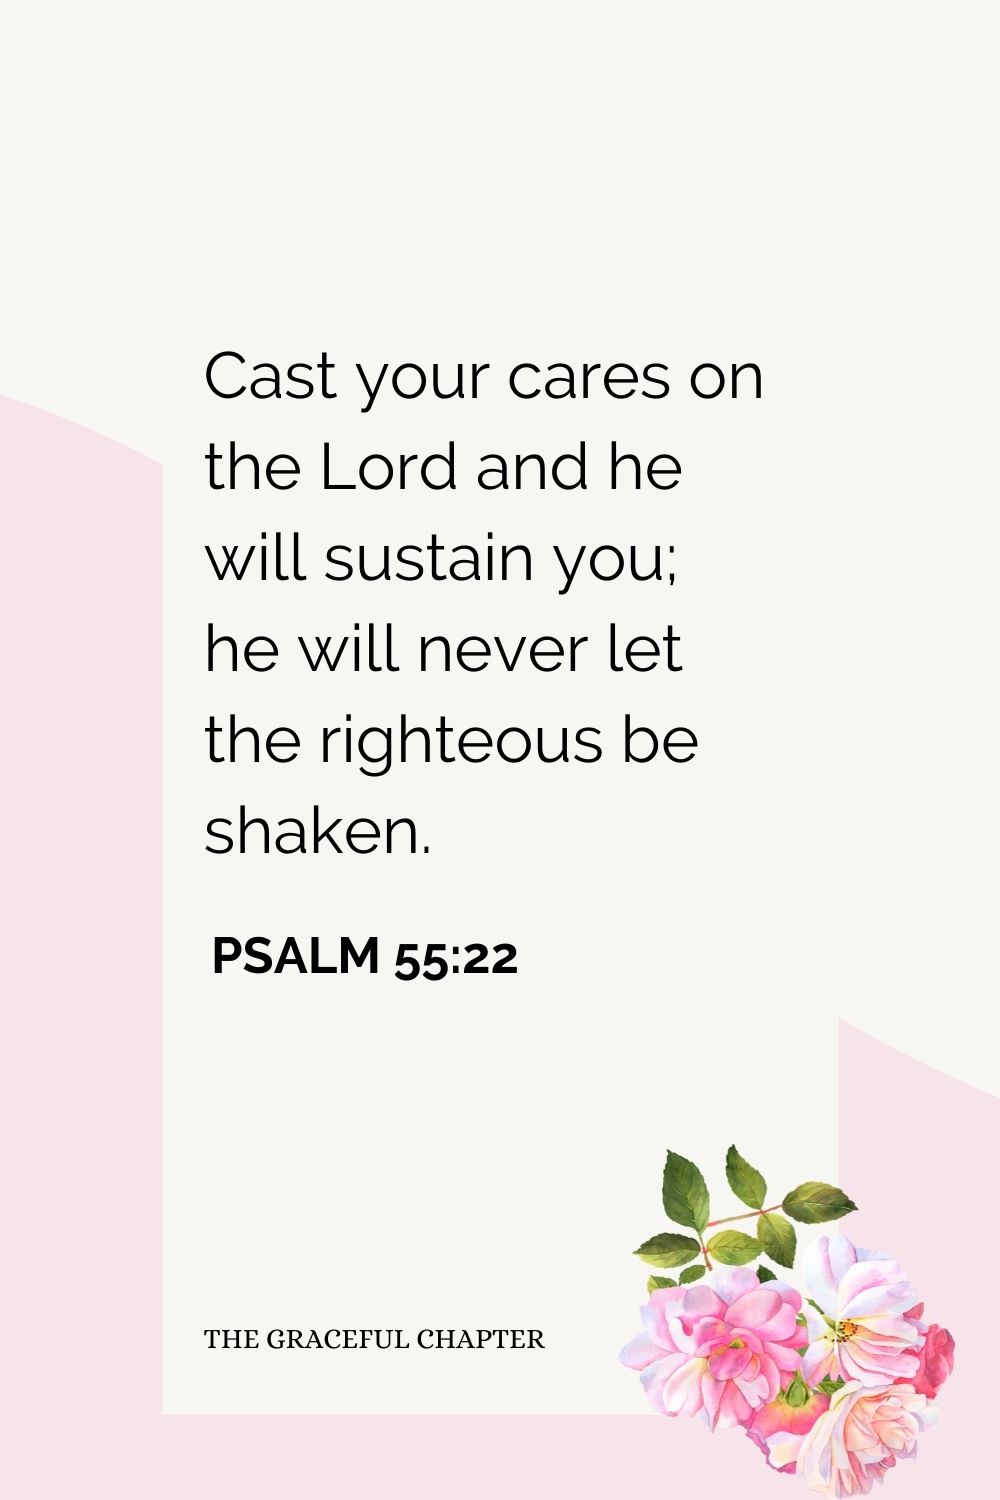 Cast your cares on the Lord and he will sustain you; he will never let the righteous be shaken.  Psalm 55:22